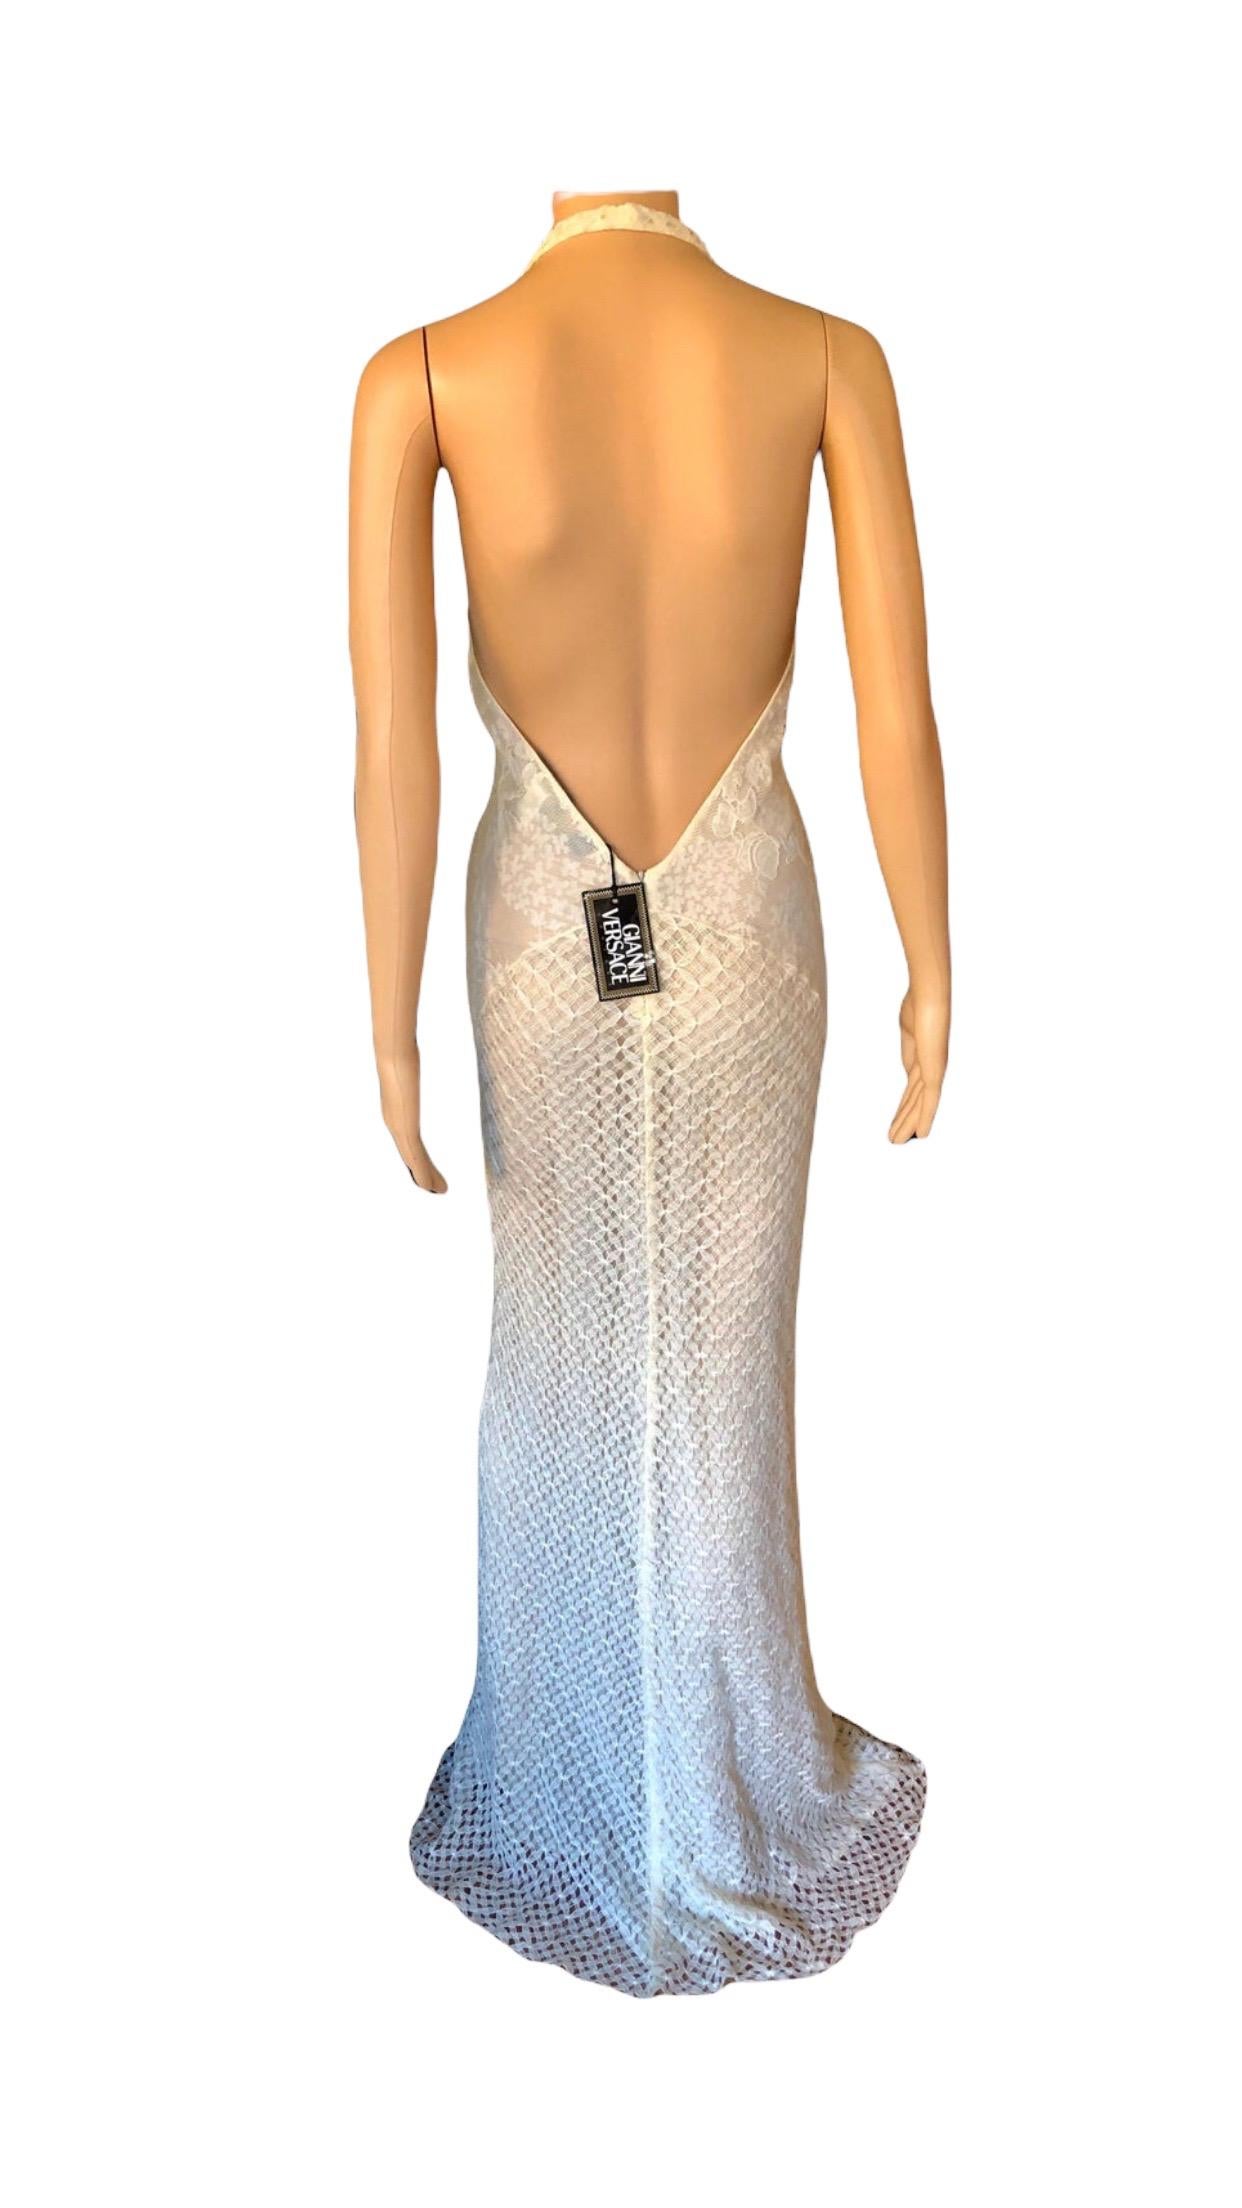 NWT Gianni Versace S/S 2002 Plunging Backless Semi Sheer Lace Ivory Dress Gown For Sale 3